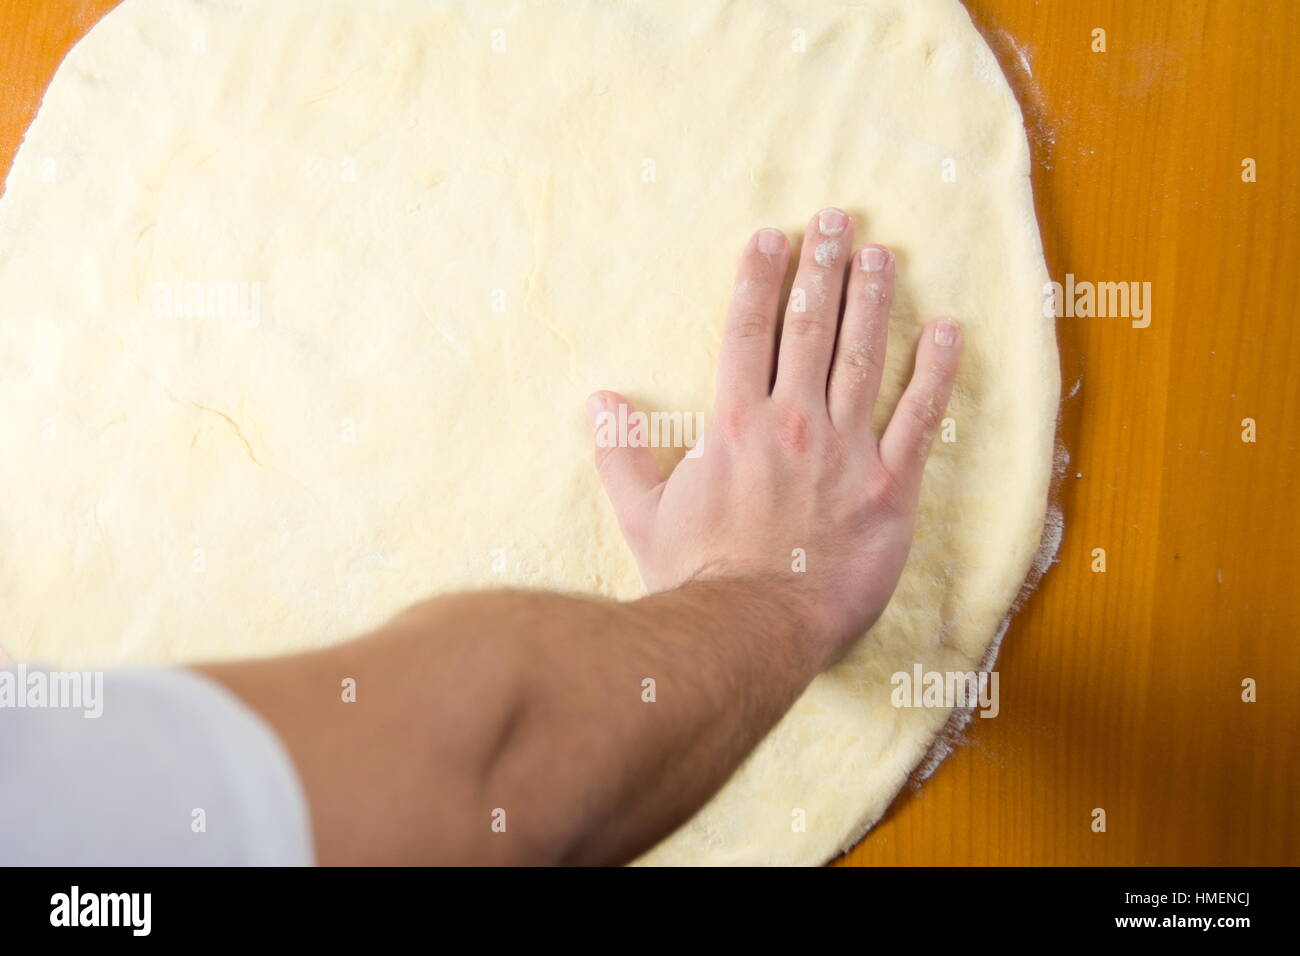 Male baker spreading the dough for making pizza Stock Photo